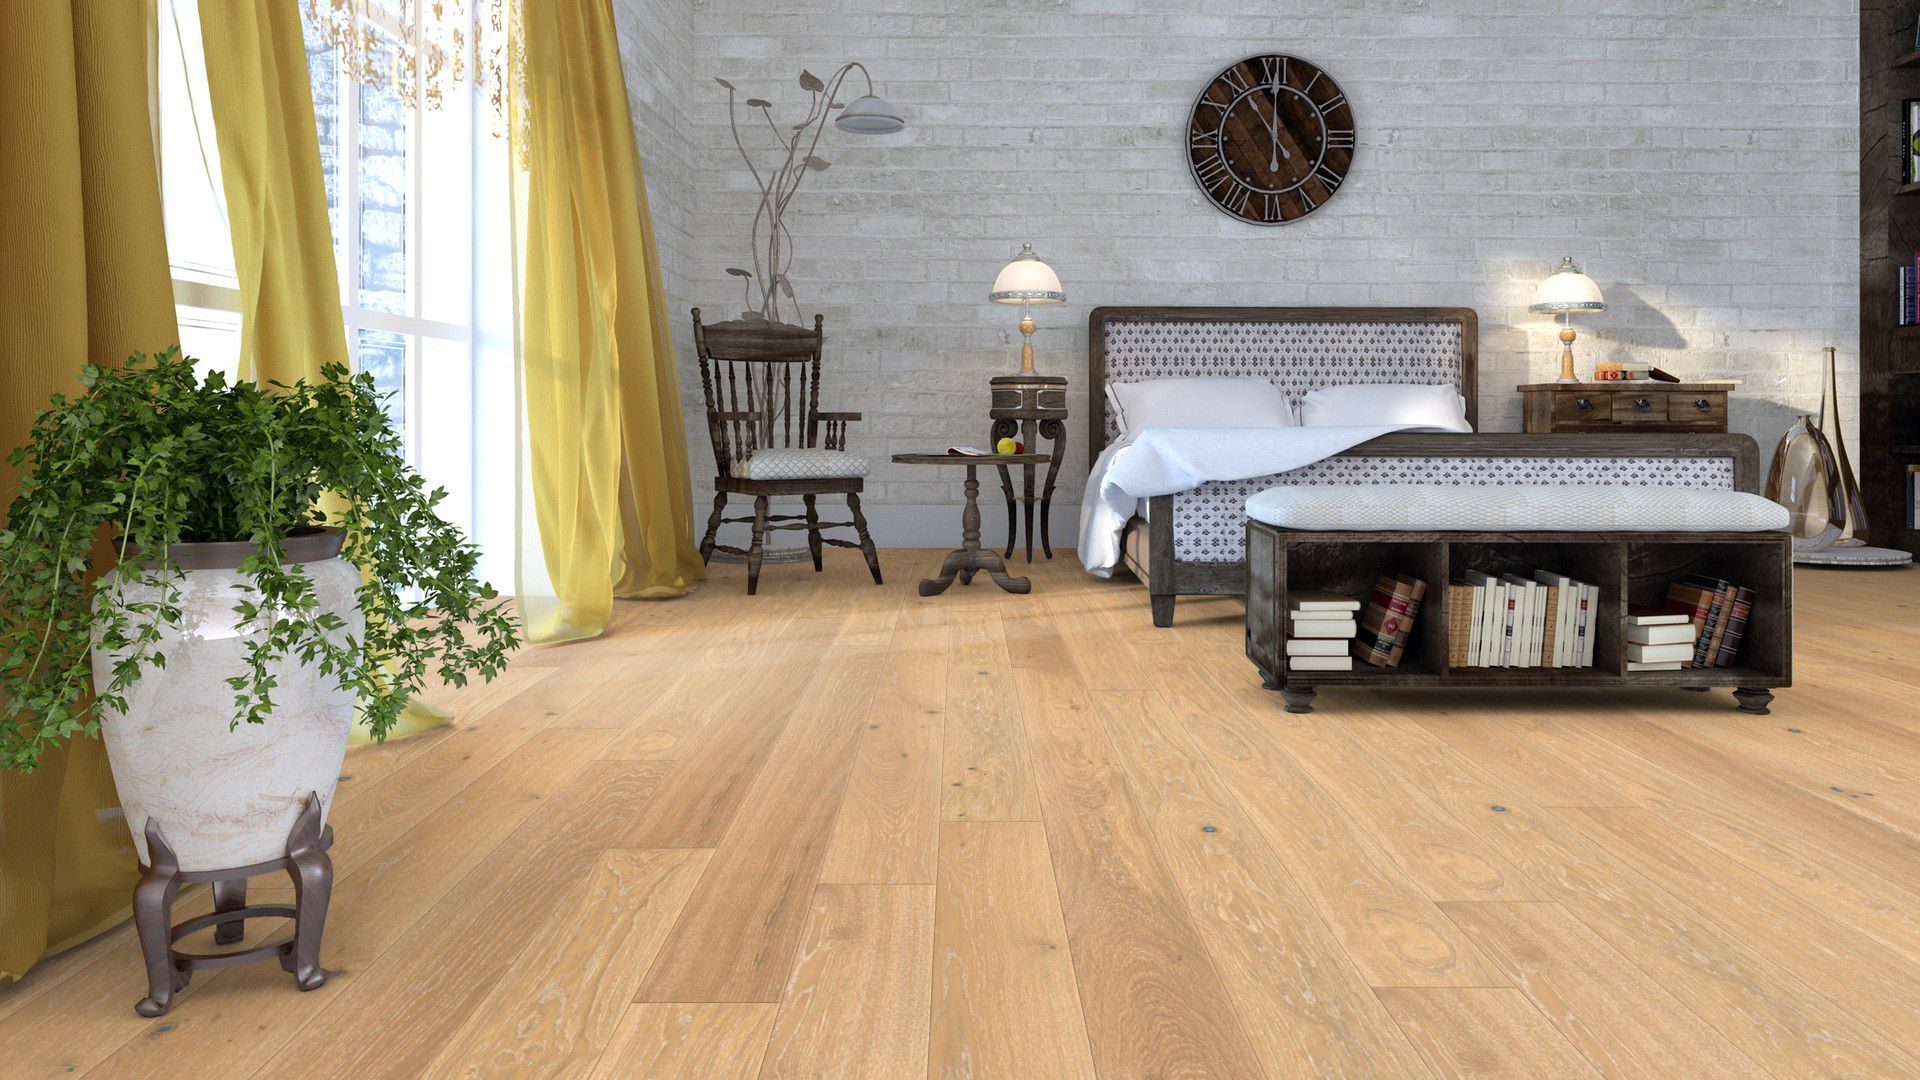 Looking after your antique wood flooring